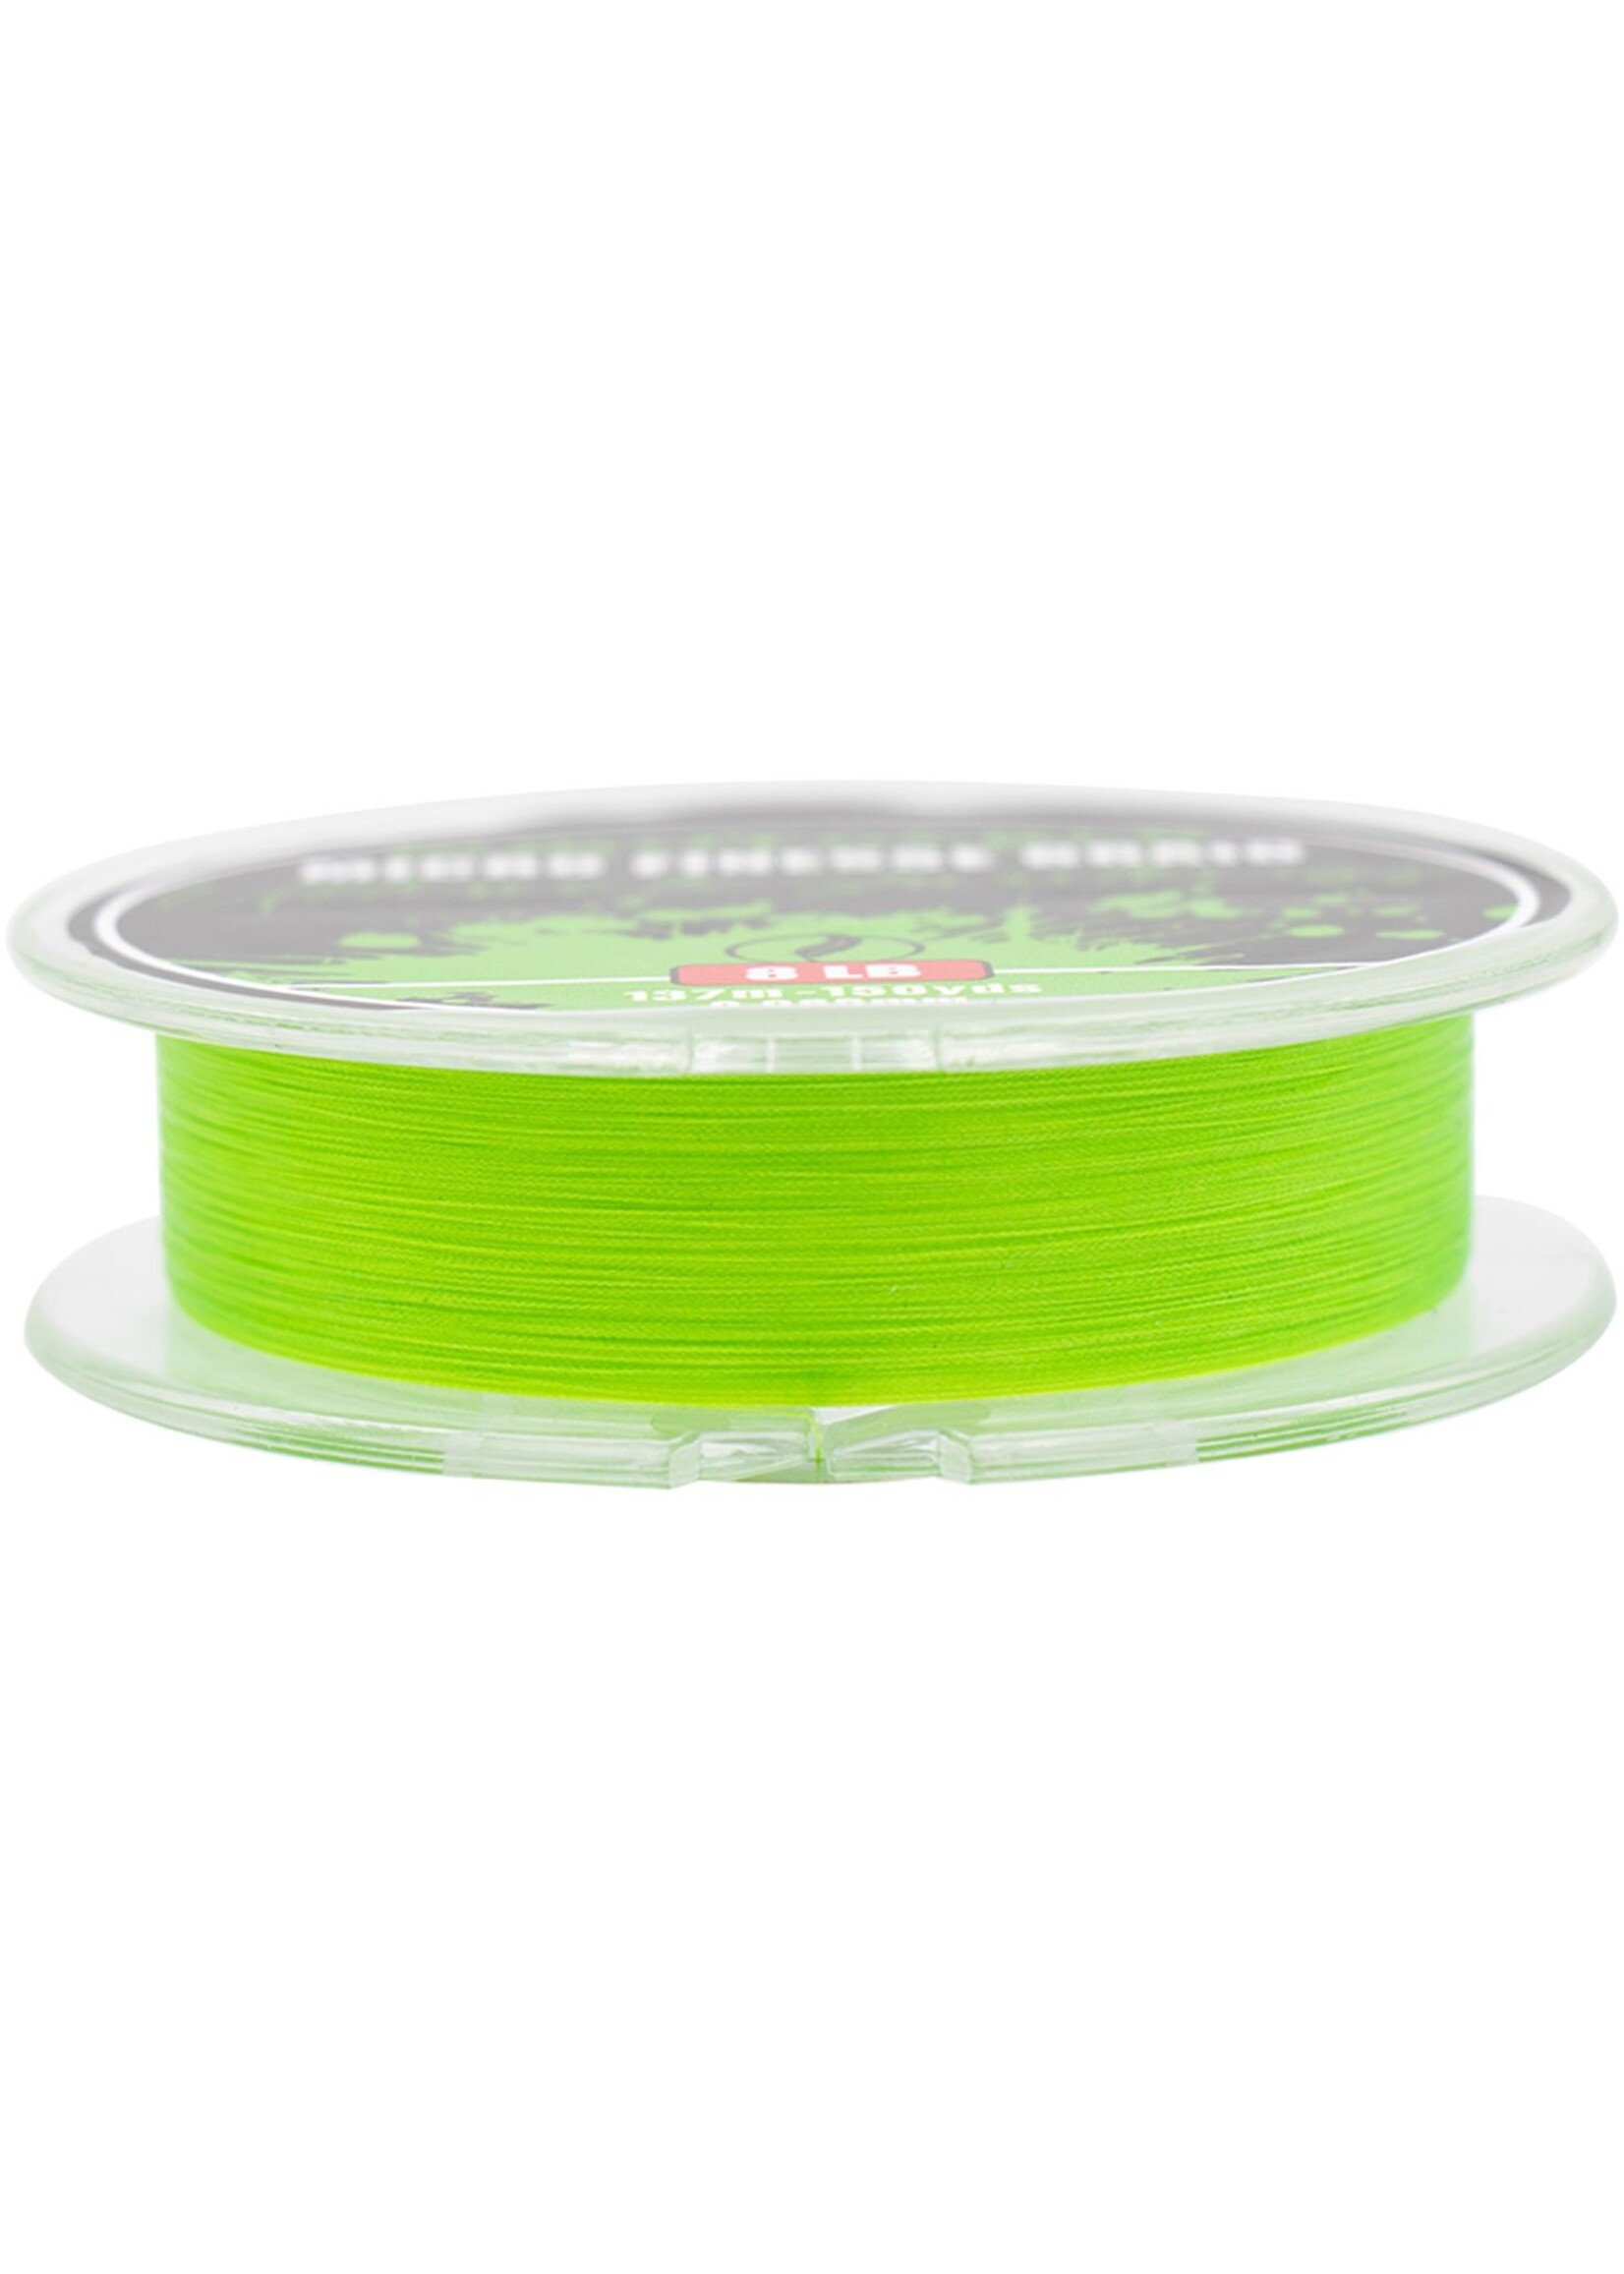 Eurotackle Eurotackle Micro Finesse "Ultimate Smoothness" Braid